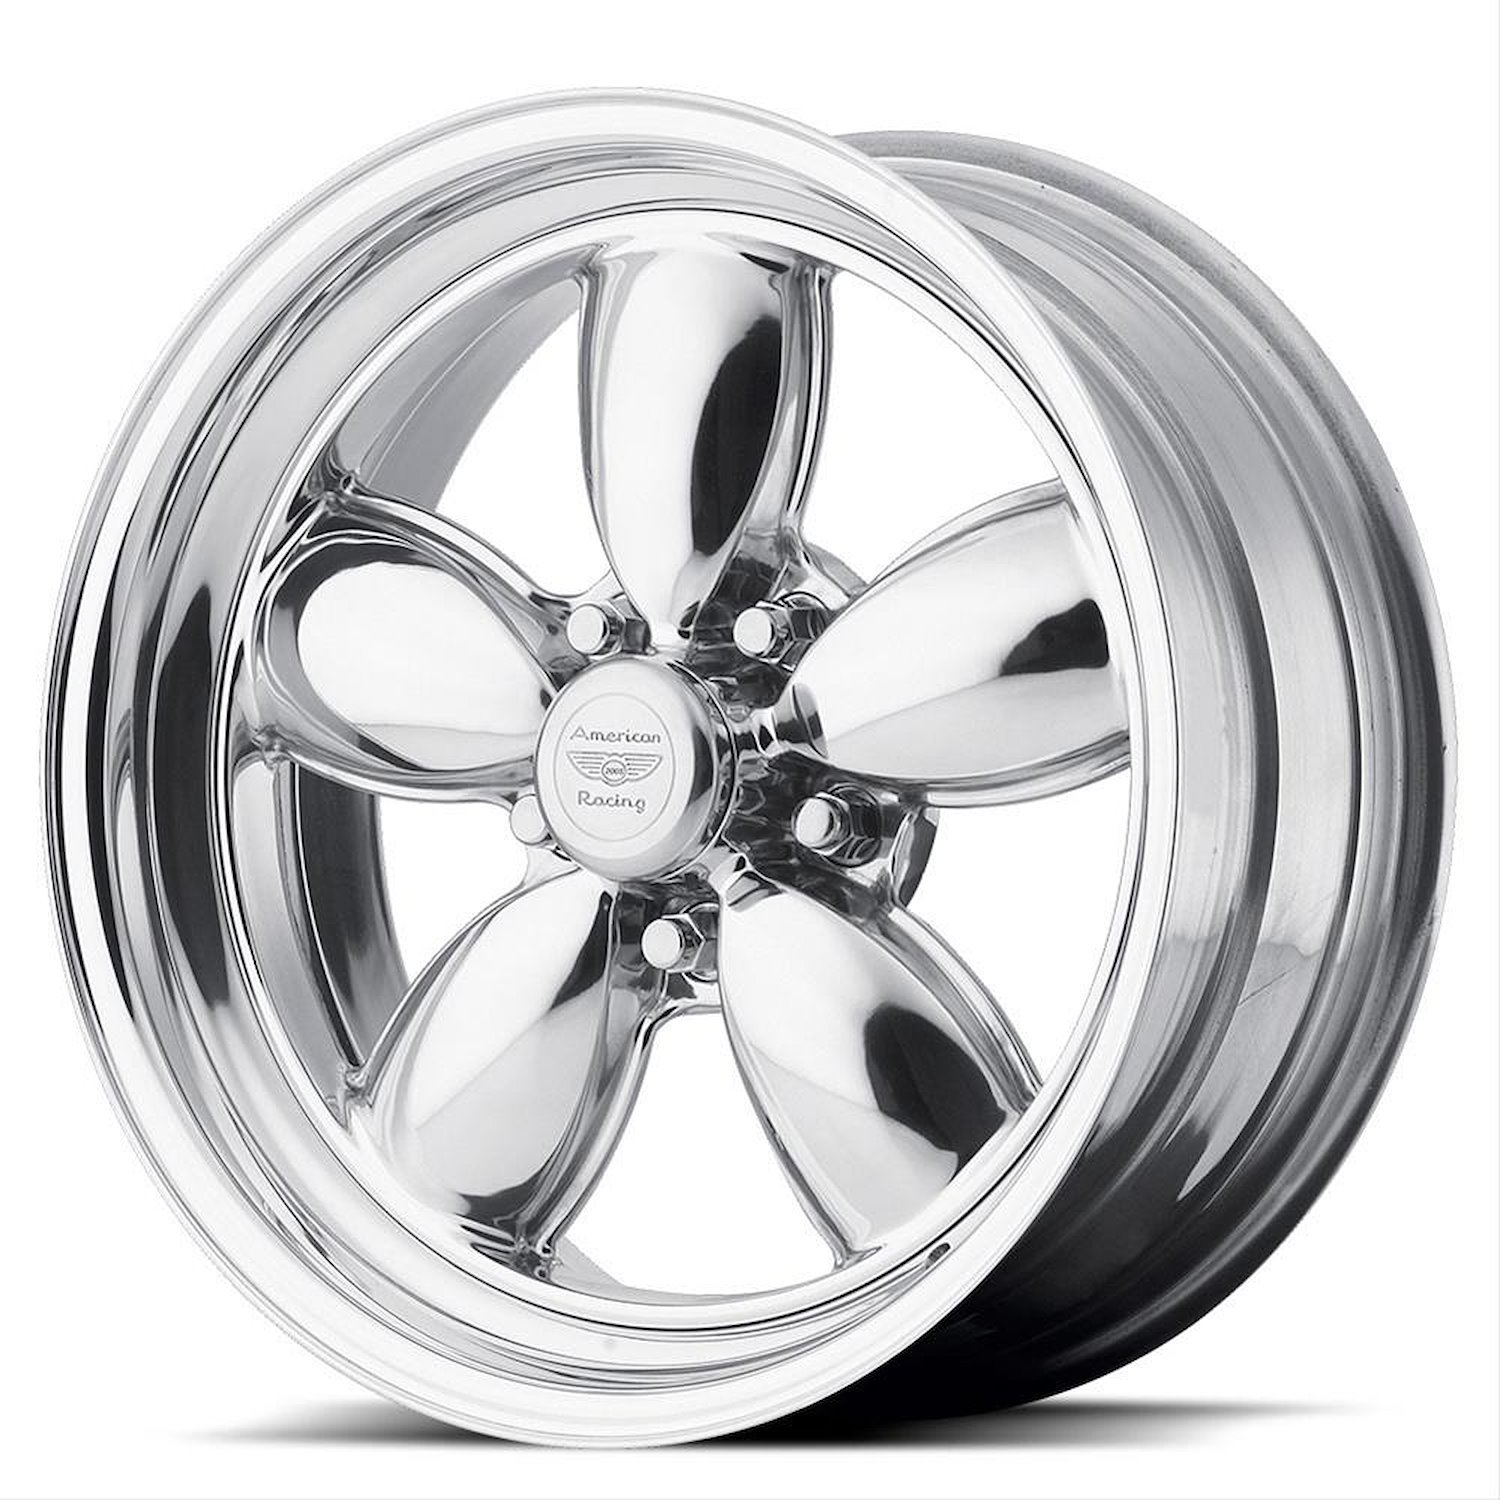 AMERICAN RACING CLASSIC 200S TWO-PIECE POLISHED 17 x 8 5X4.75 13 5.01